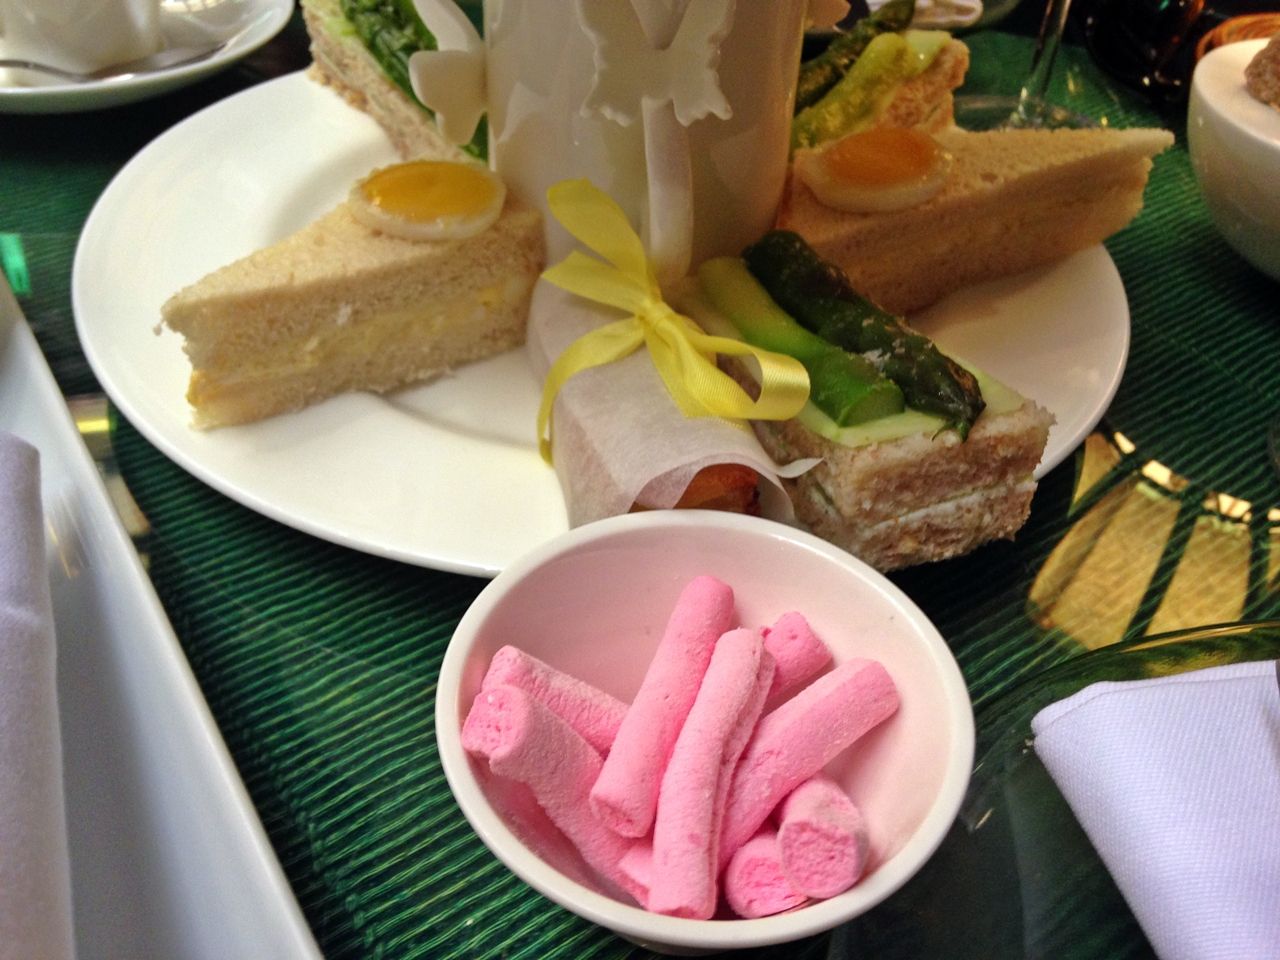 Sketch London Afternoon Tea Review - The Best Afternoon Tea In London